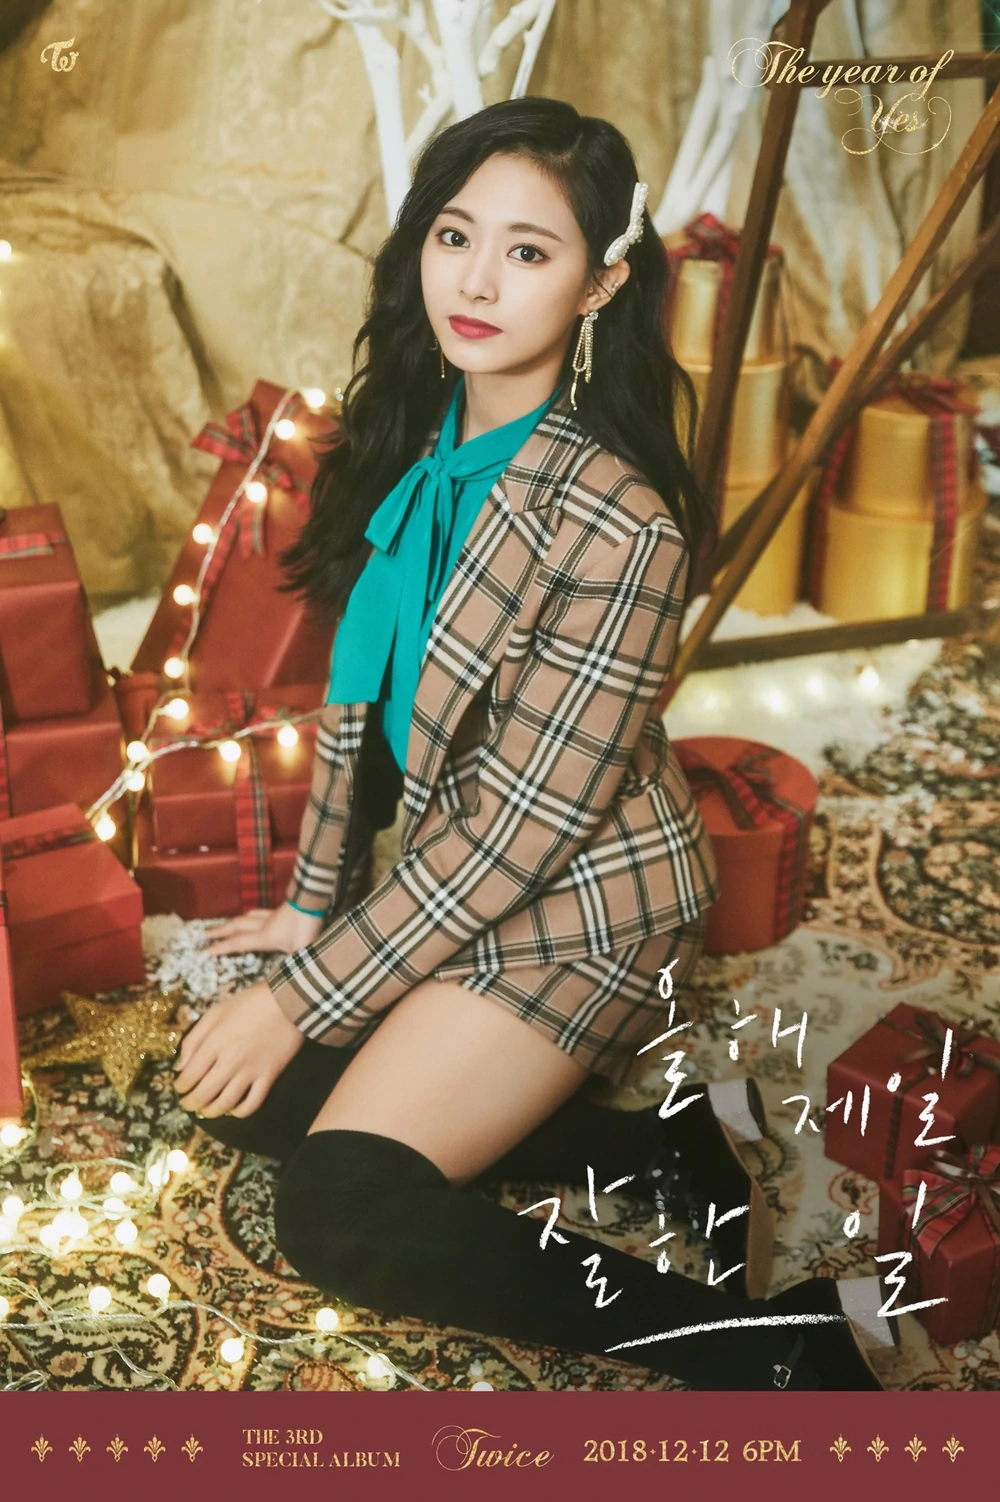 Twice Year Of Yes Tzuyu Concept Teaser Picture Image Photo Kpop K-Concept